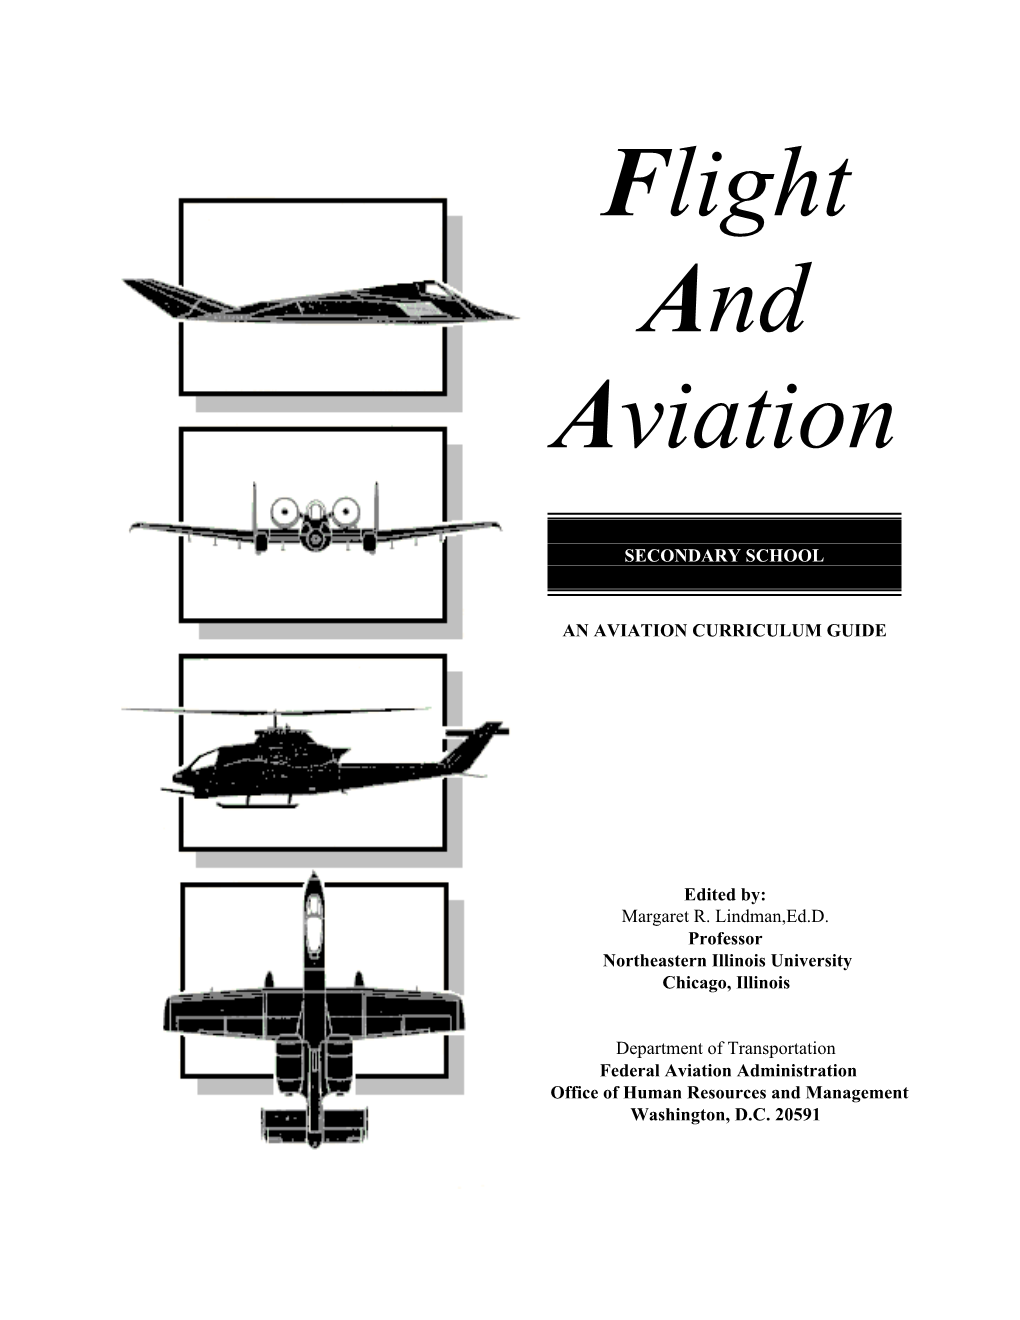 Flight and Aviation for the Secondary Schools